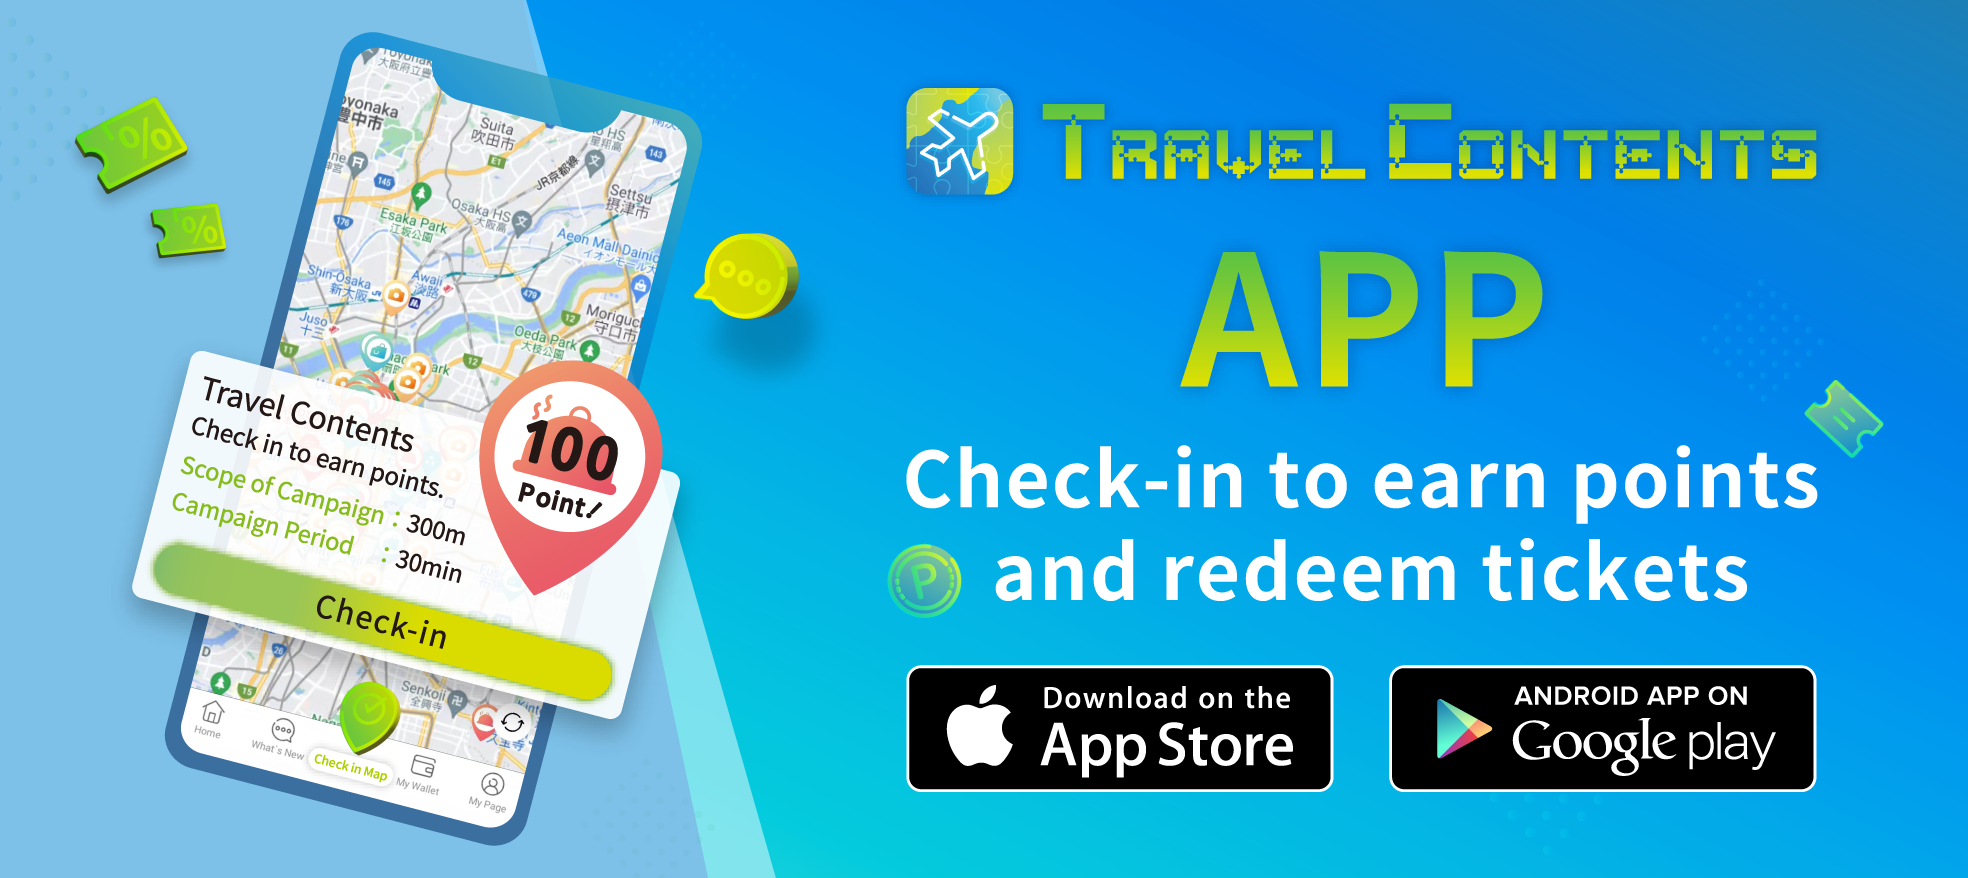 Download the Travel Contents app to travel Kansai with useful information at your fingertips!